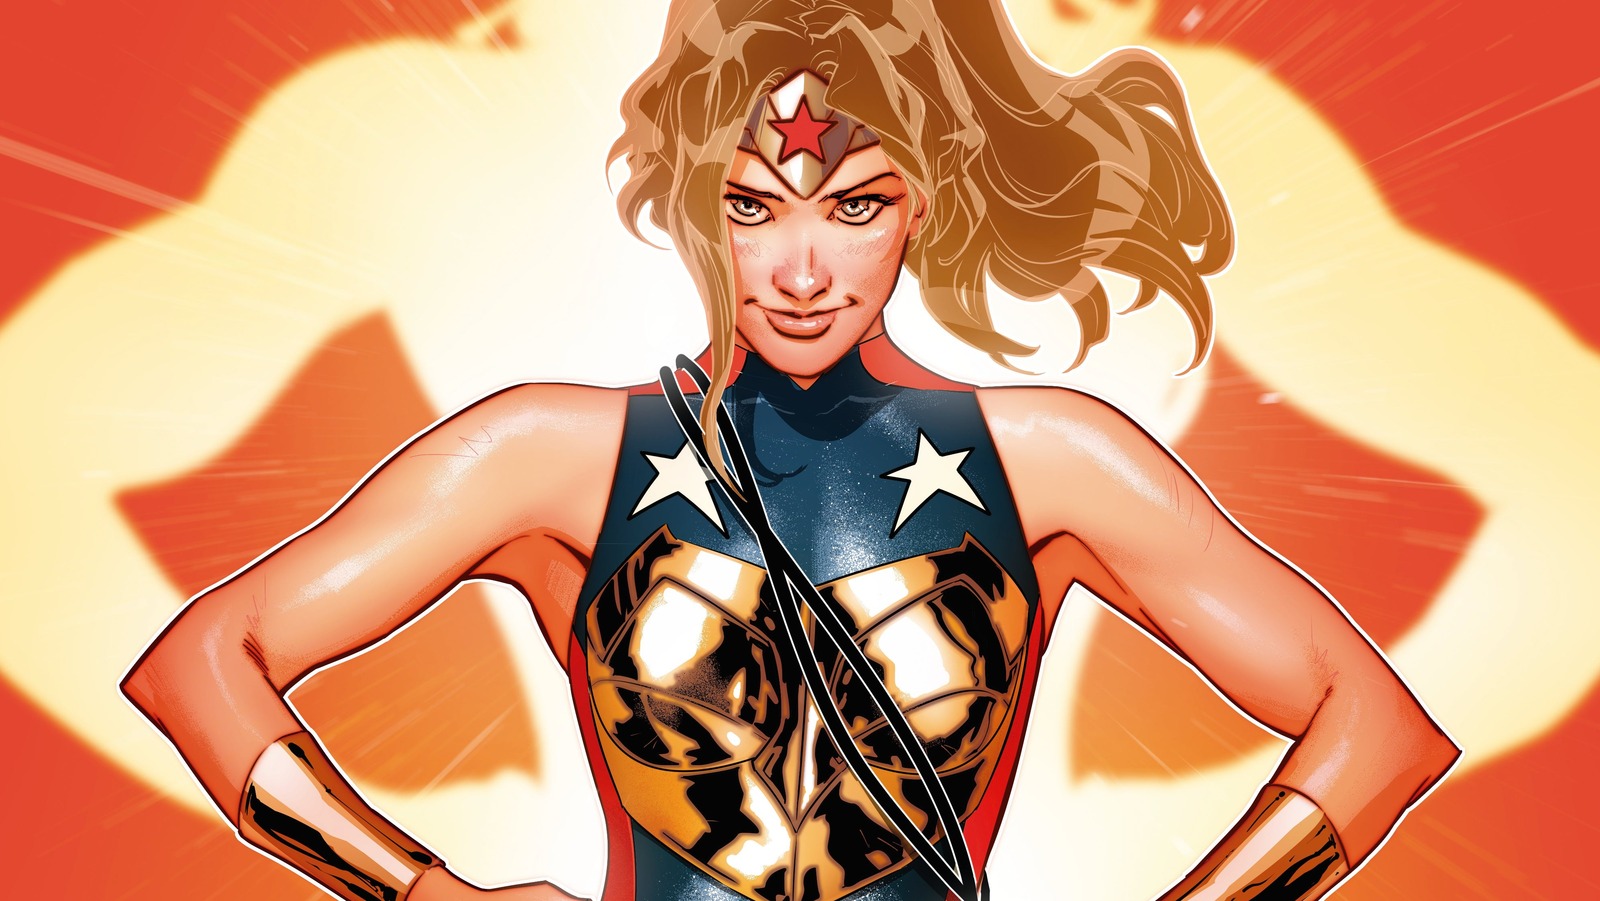 Wonder Woman's daughter Trinity arrives in upcoming DC comic